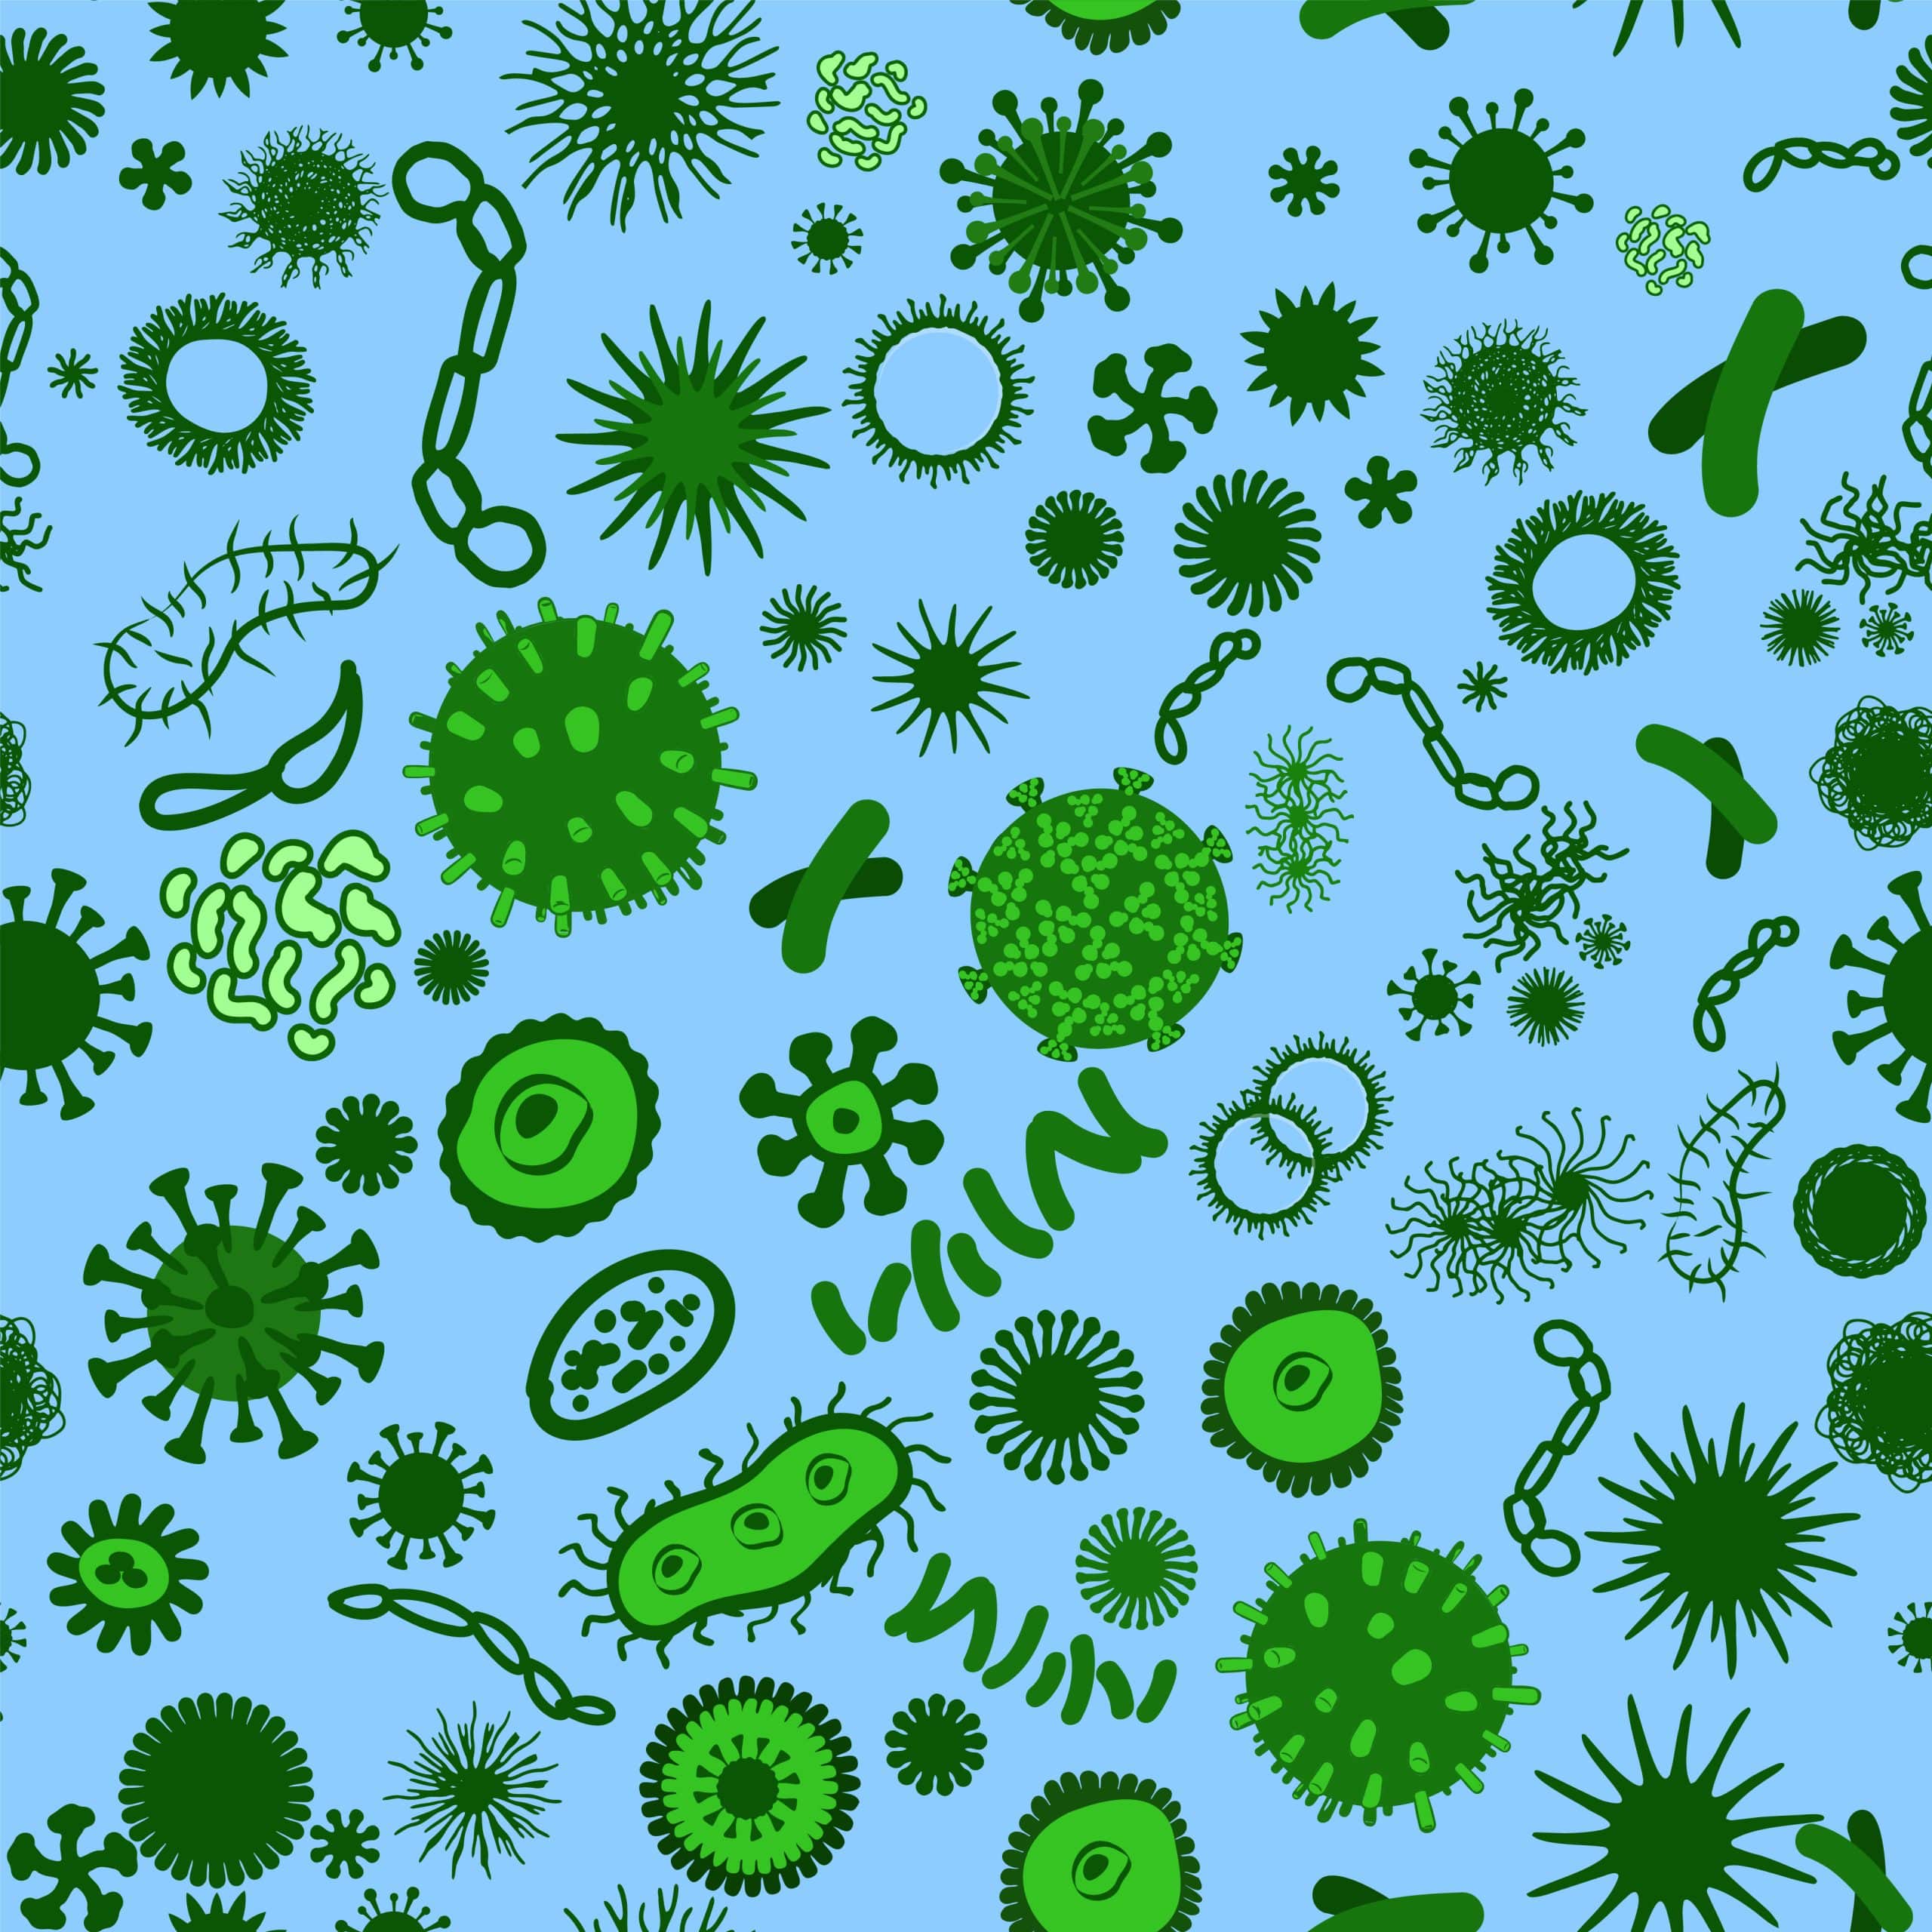 Micro organisms, microbes, bacteria,under the microscope. Seamless pattern.